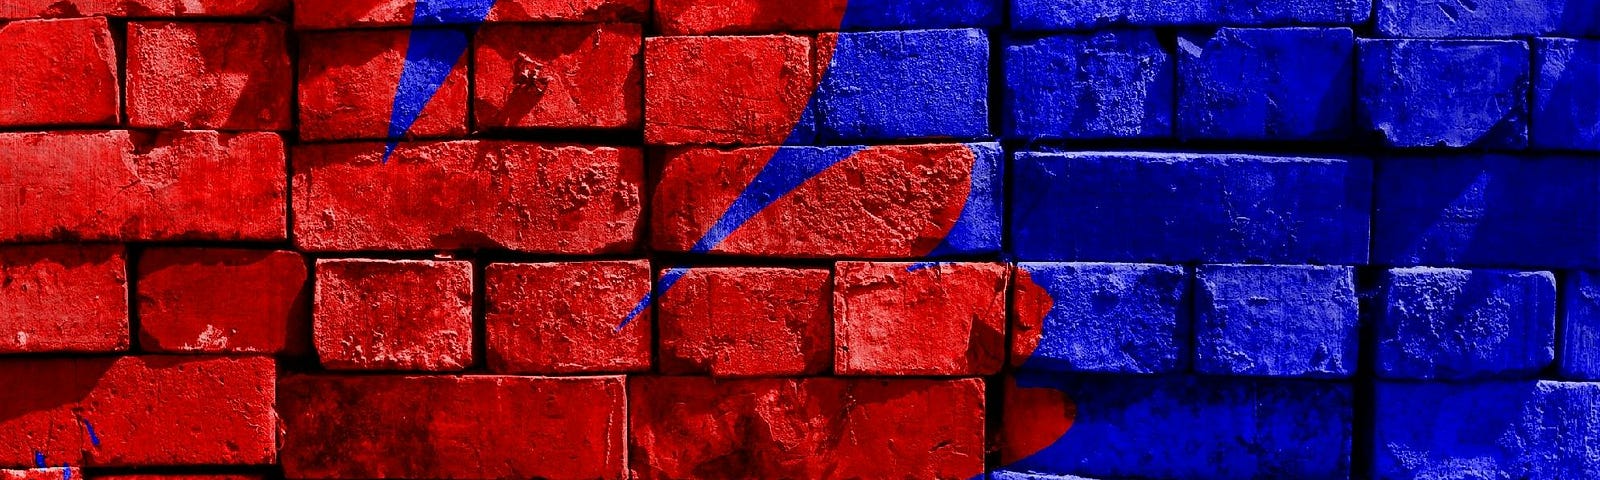 A red and blue brick wall